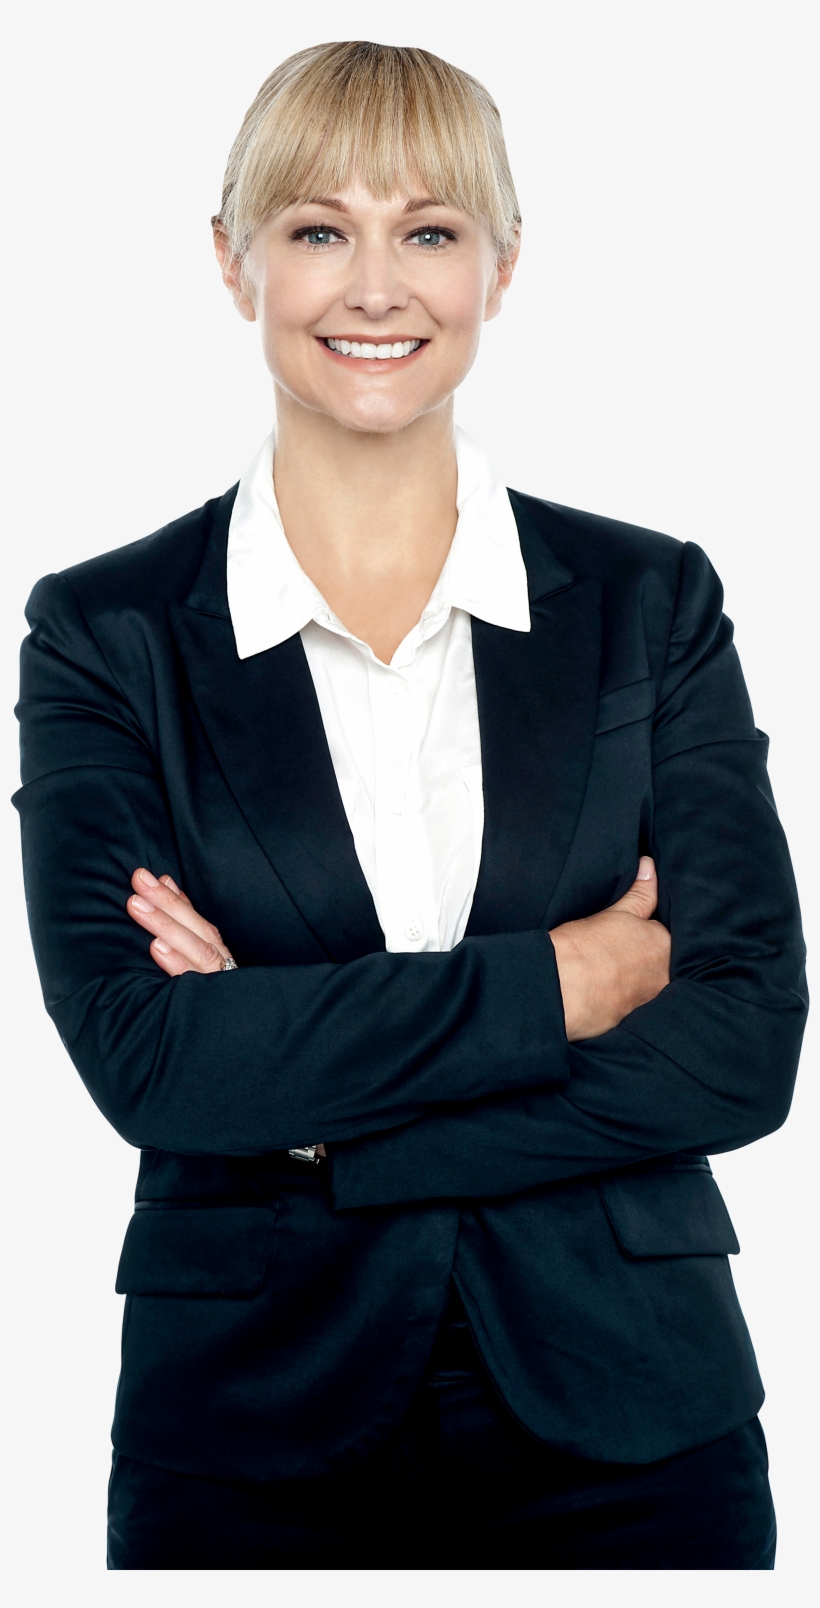 Women In Suit Png Image - Woman In Suit Png, transparent png #2491785